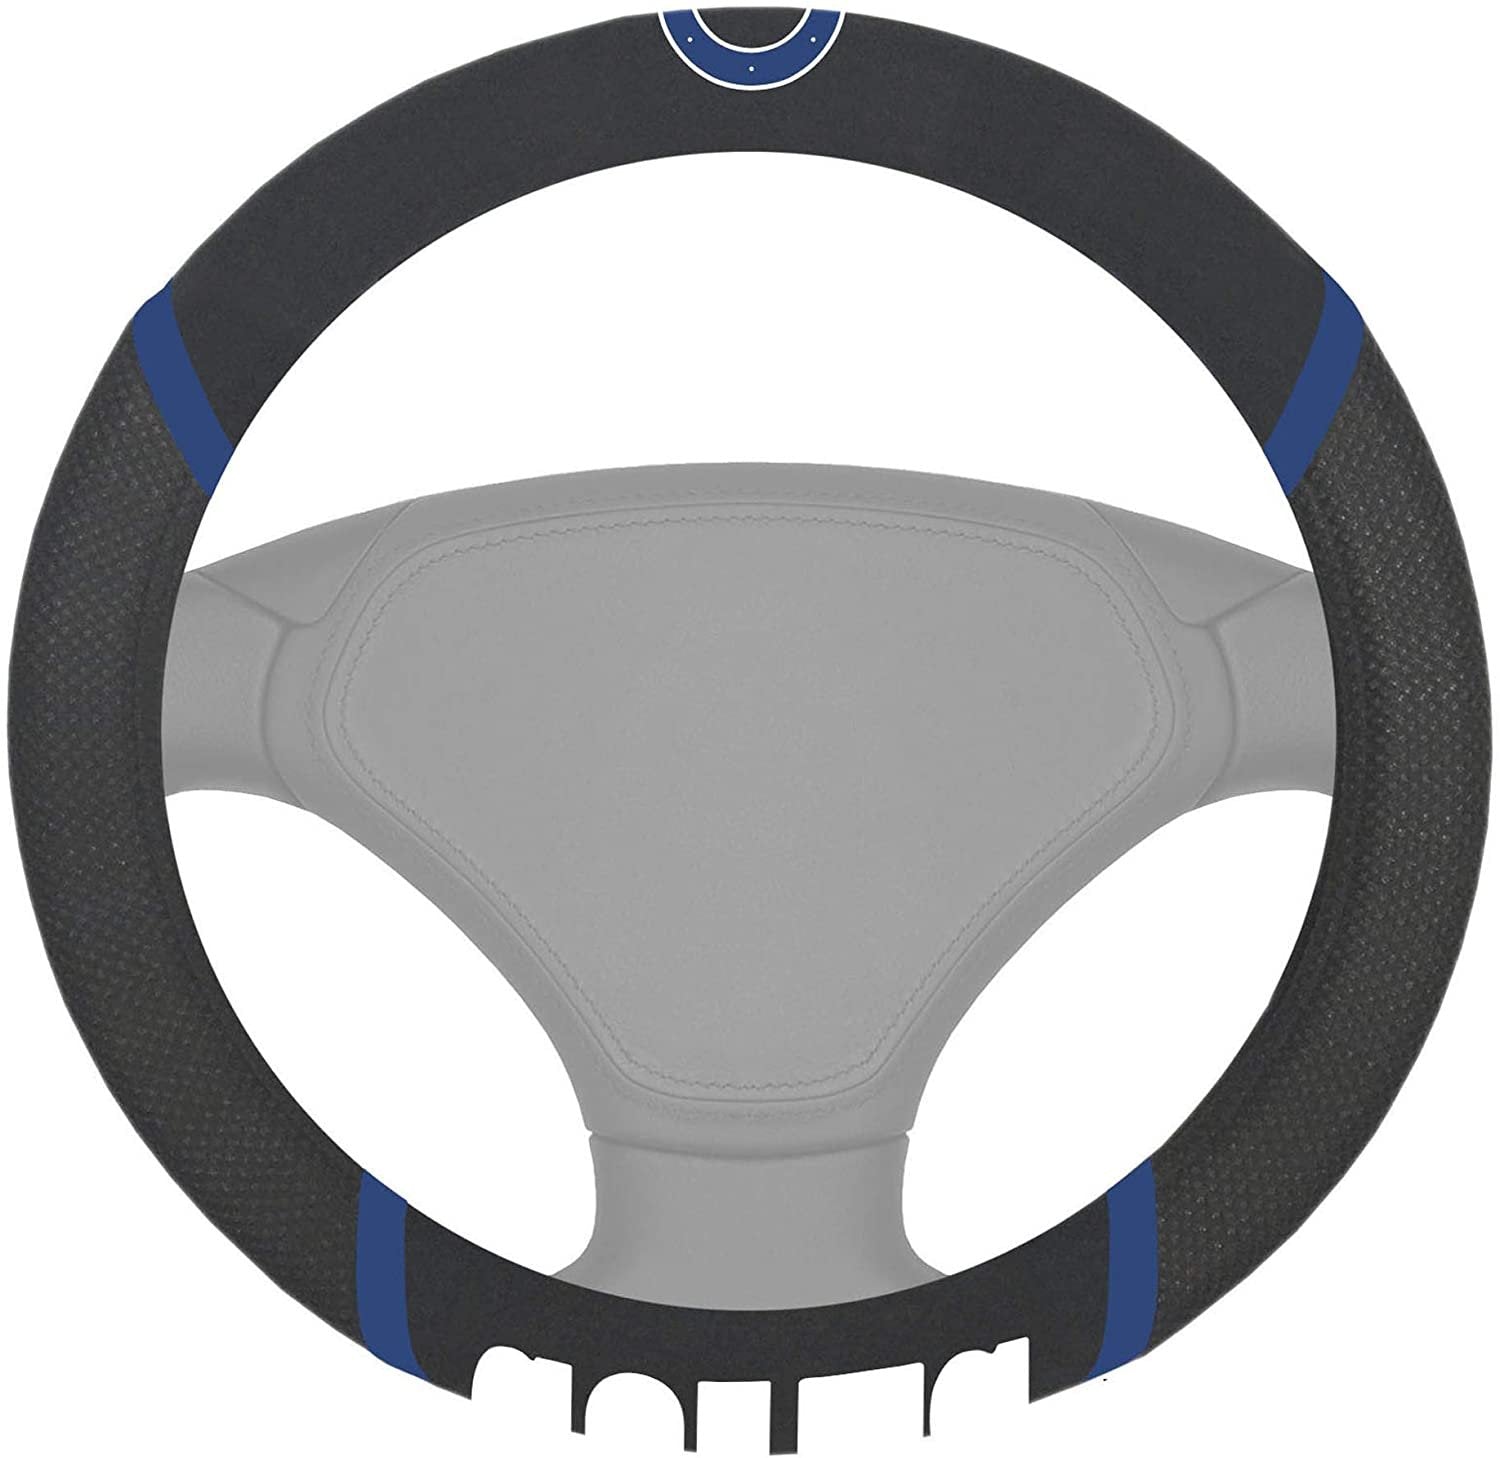 Indianapolis Colts Steering Wheel Cover Premium Embroidered Black 15 Inch